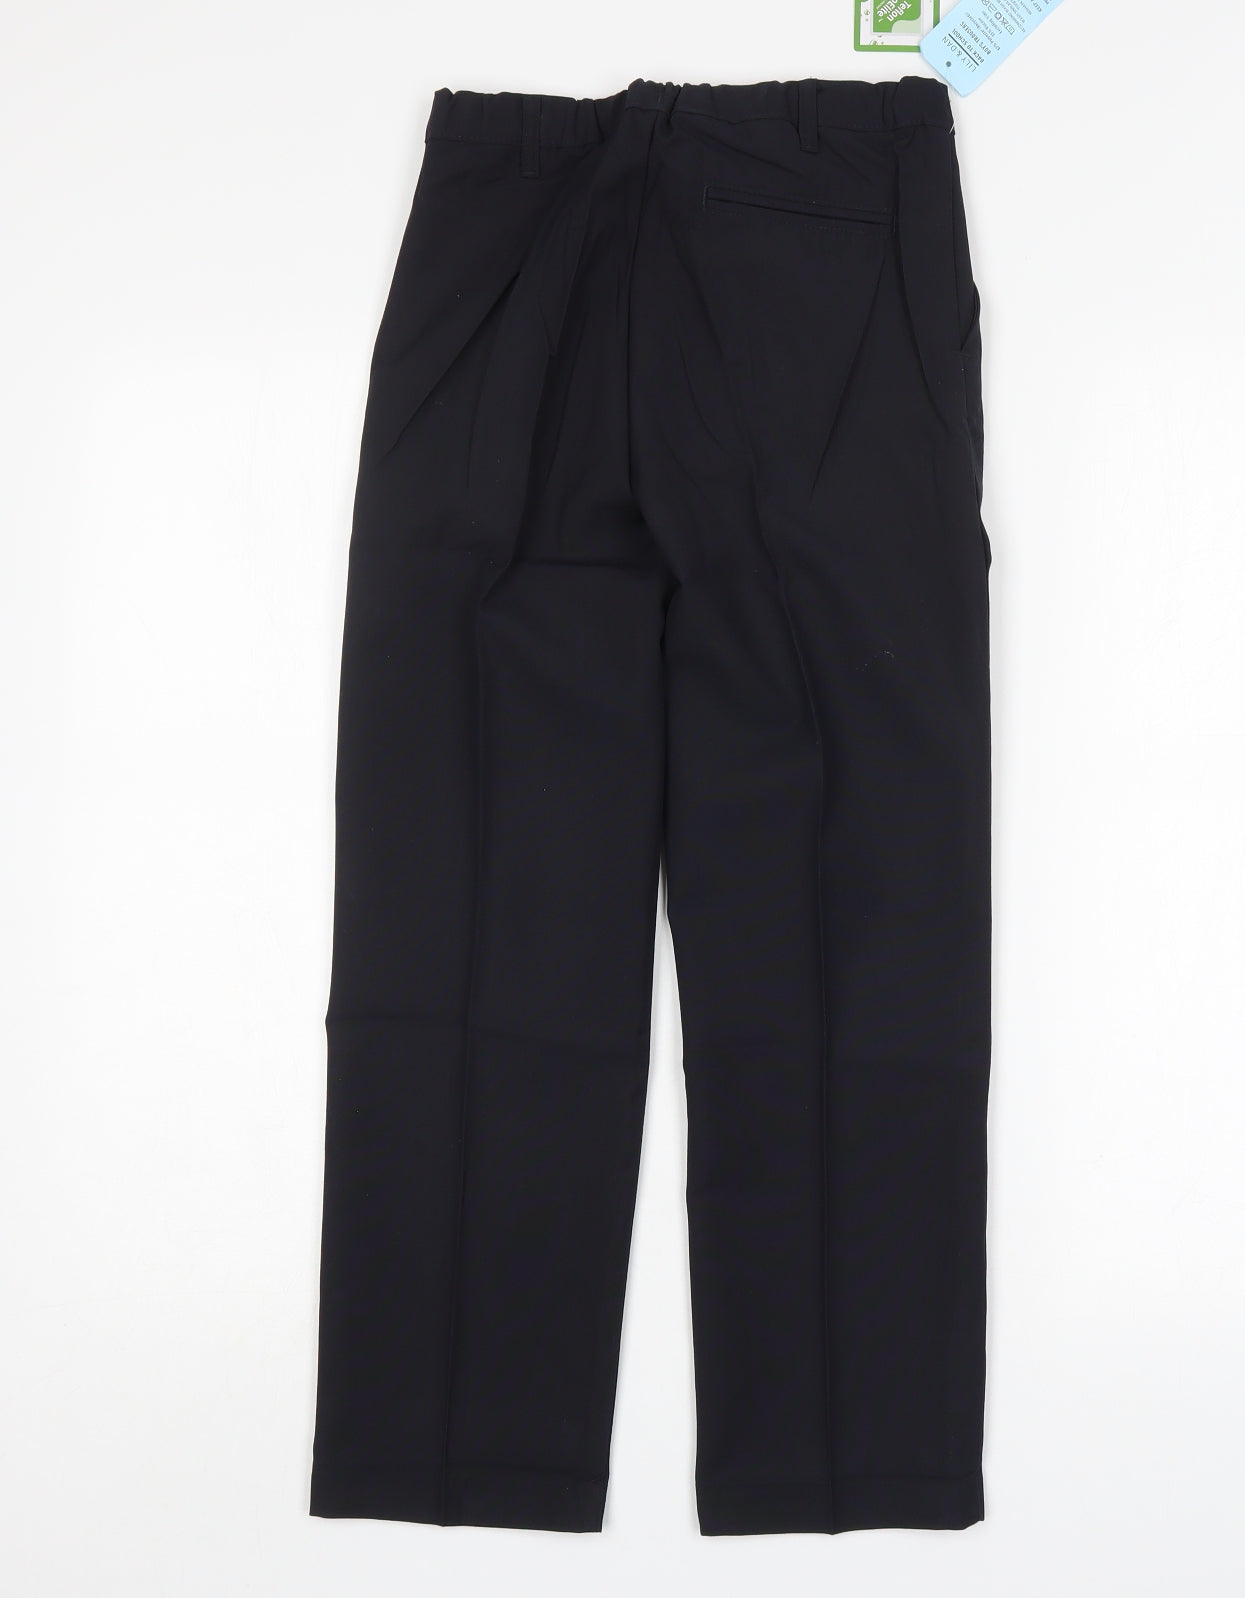 Lily& Dan Boys Blue  Polyester Dress Pants Trousers Size 9 Years  Regular